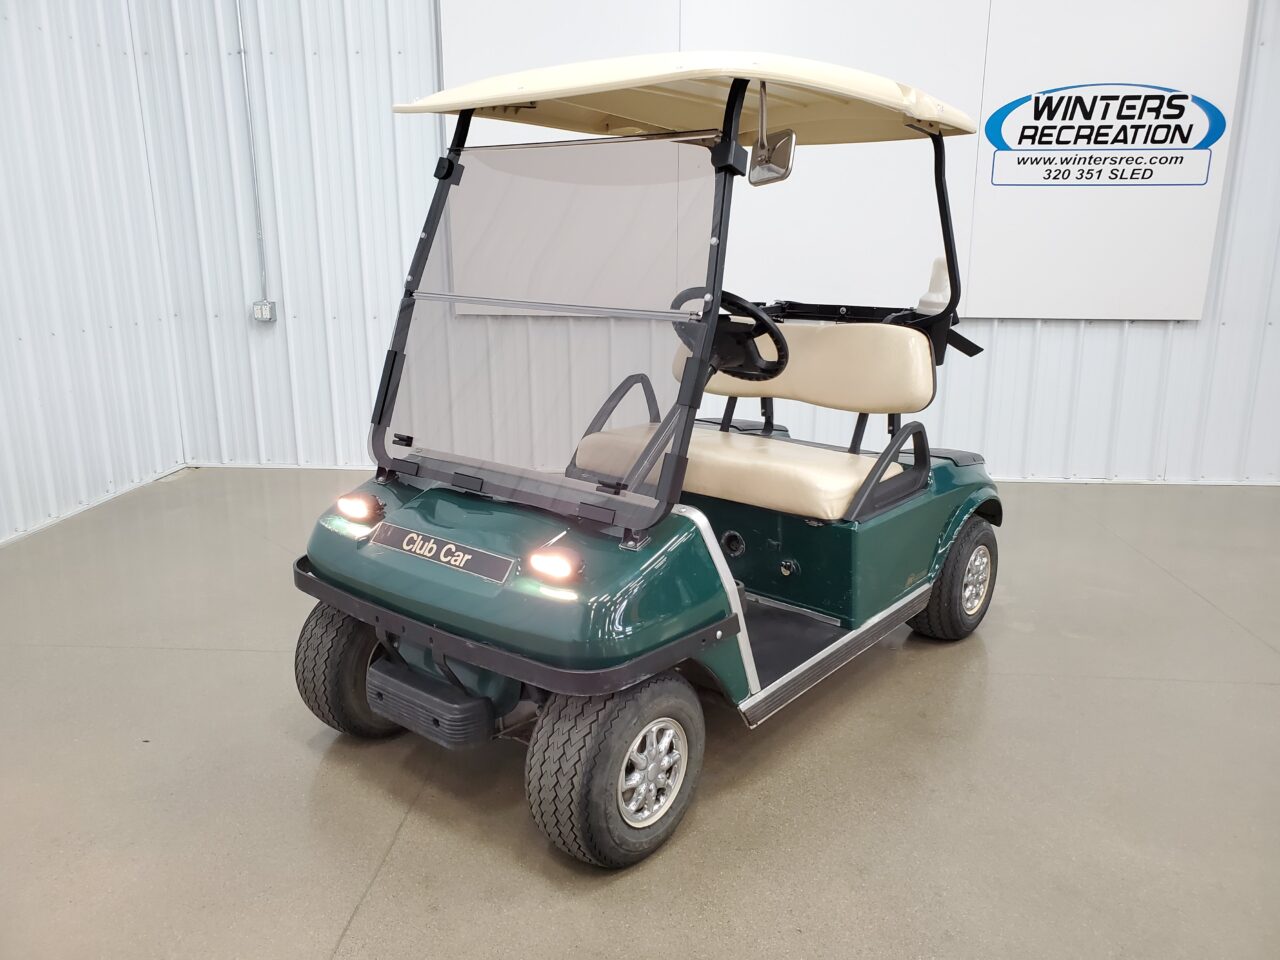 2008 Club Car DS Electric Golf Cart, Stock Green - Winters Recreation